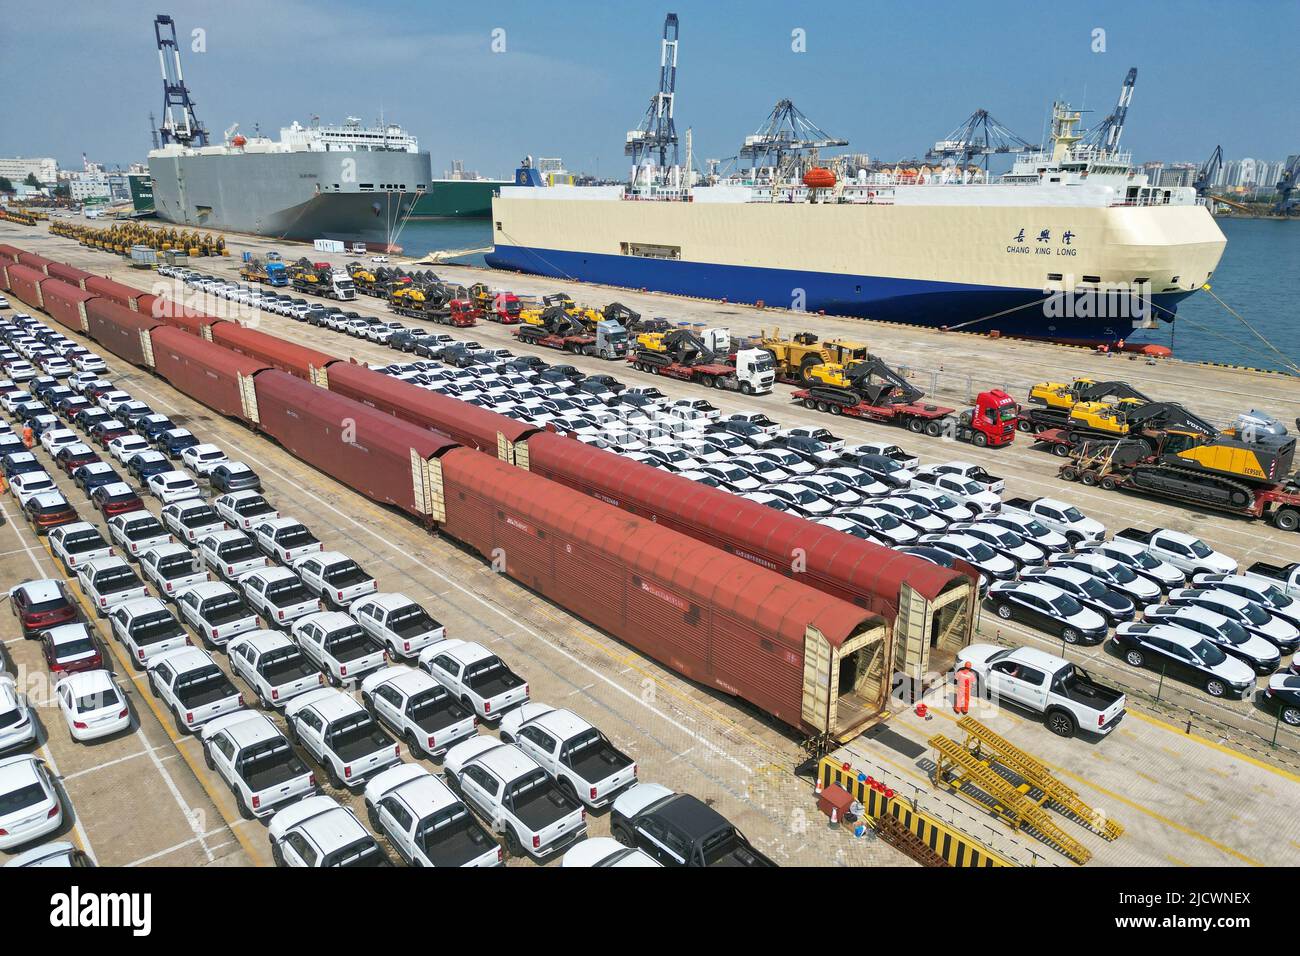 YANTAI, CHINA - JUNE 16, 2022 - A staff member drives an export truck from a freight train in Yantai port, East China's Shandong Province, June 16, 20 Stock Photo